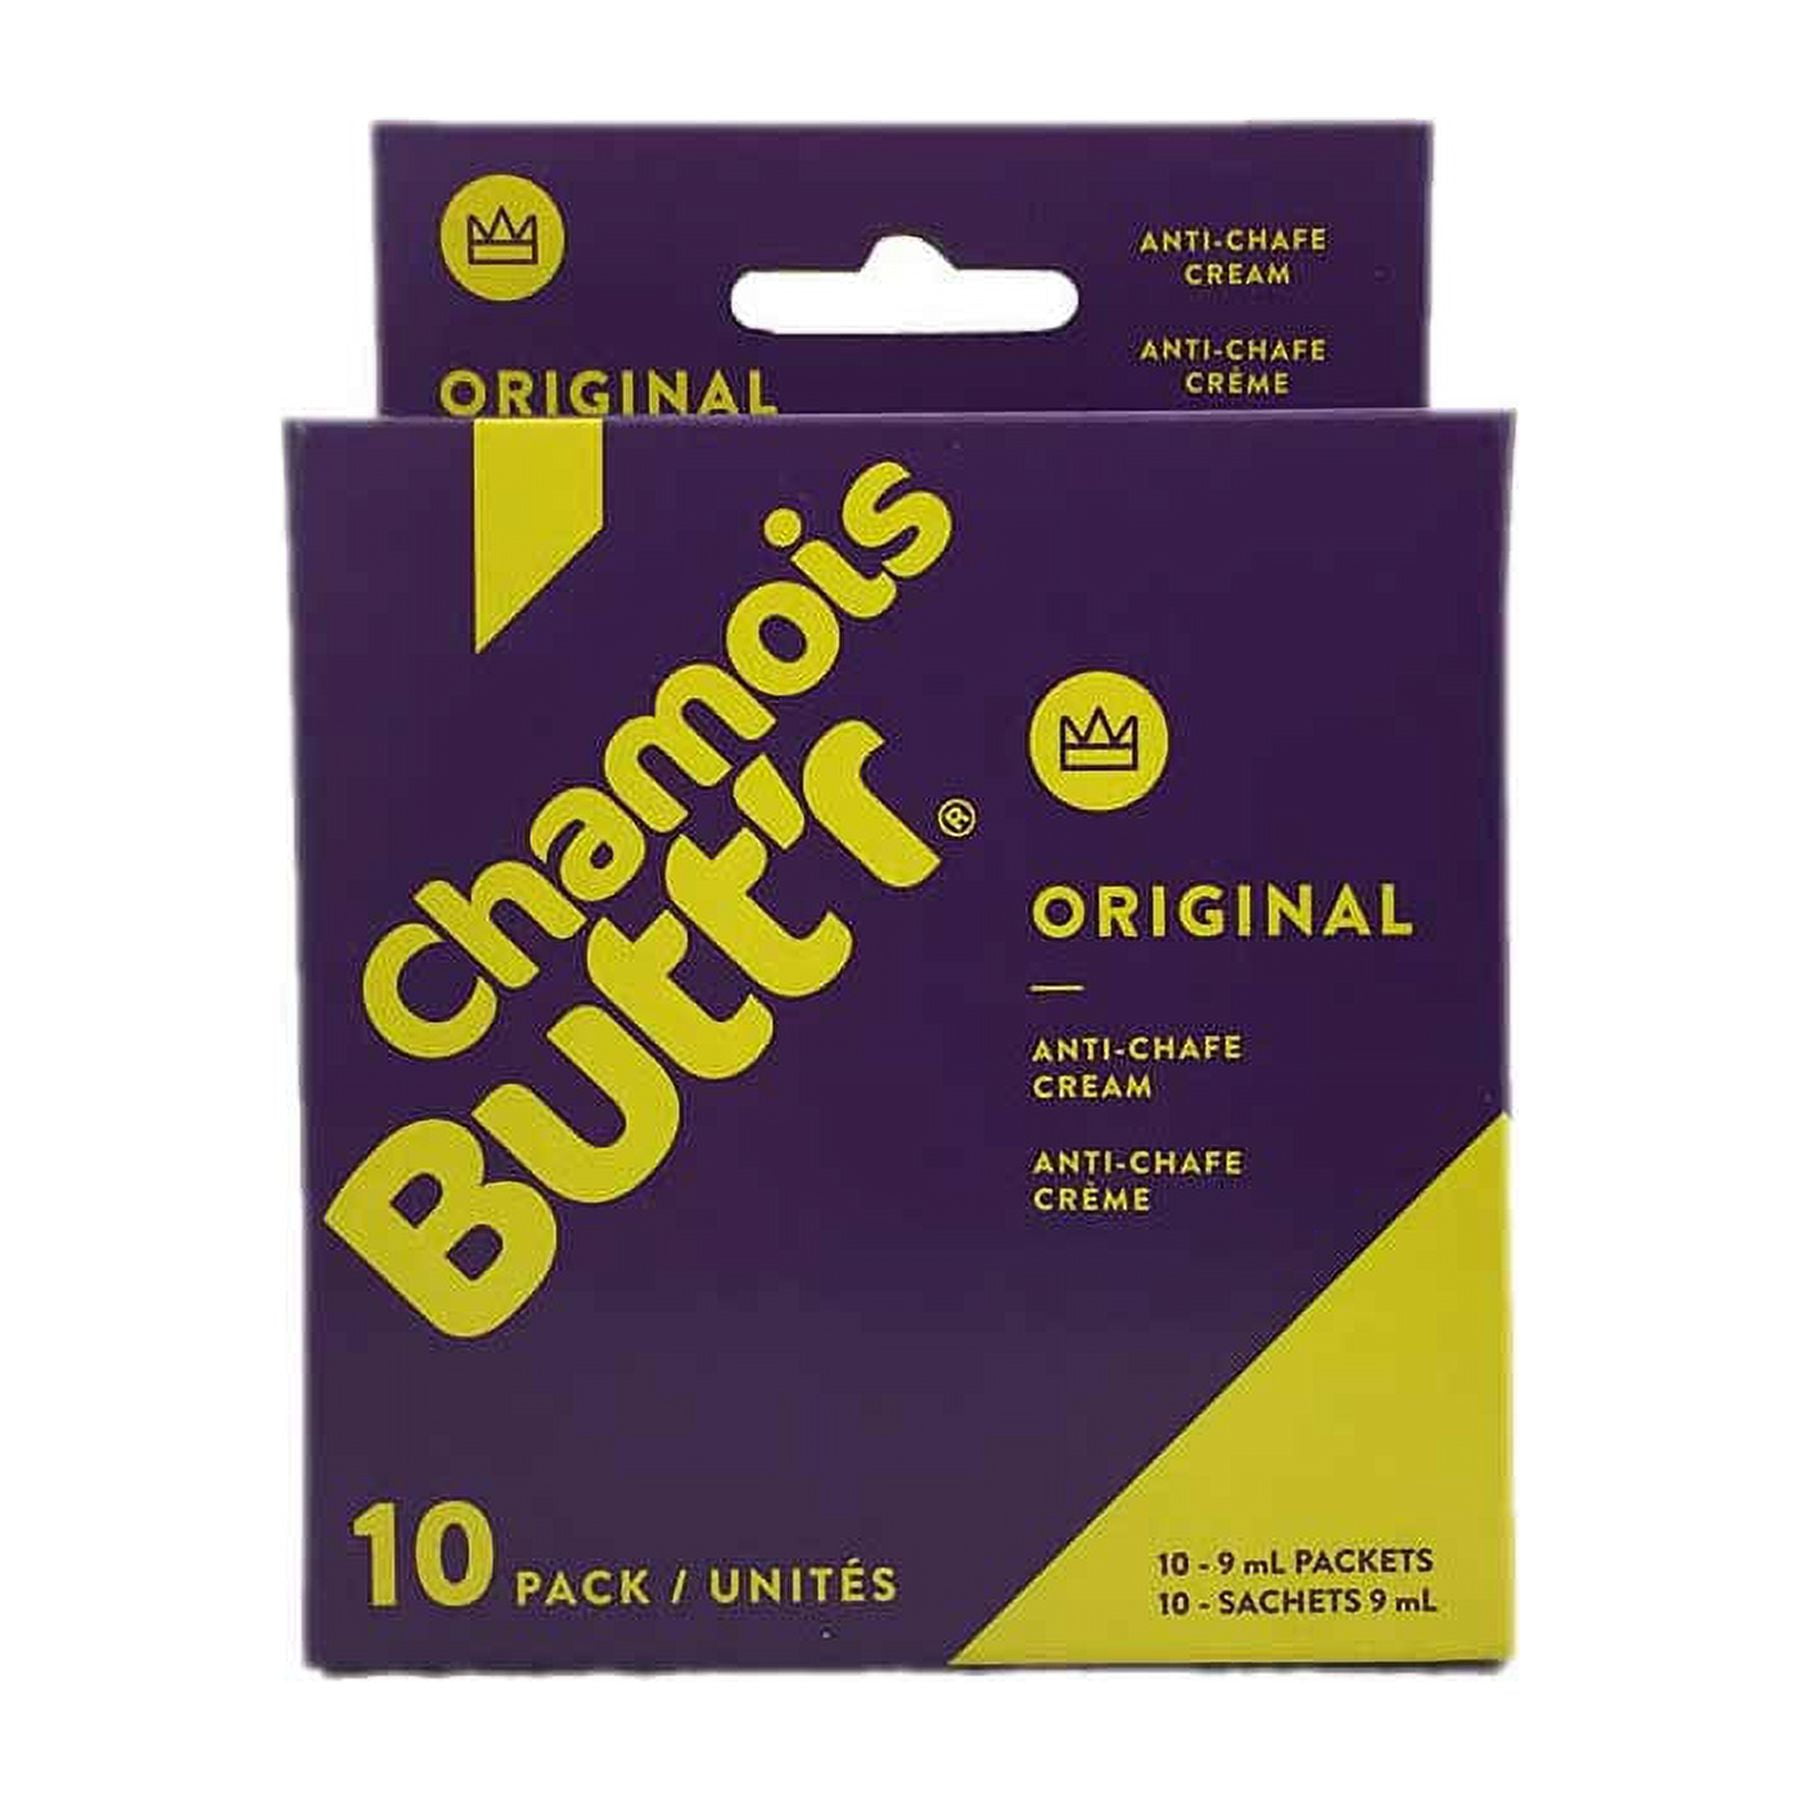  Chamois Butt'r Original Anti-Chafe Cream, 8 oz tube & Body  Glide For Her Anti Chafe Balm: anti chafing stick with added emollients.  Prevent rubbing leading to chafing, raw skin, and irritation 